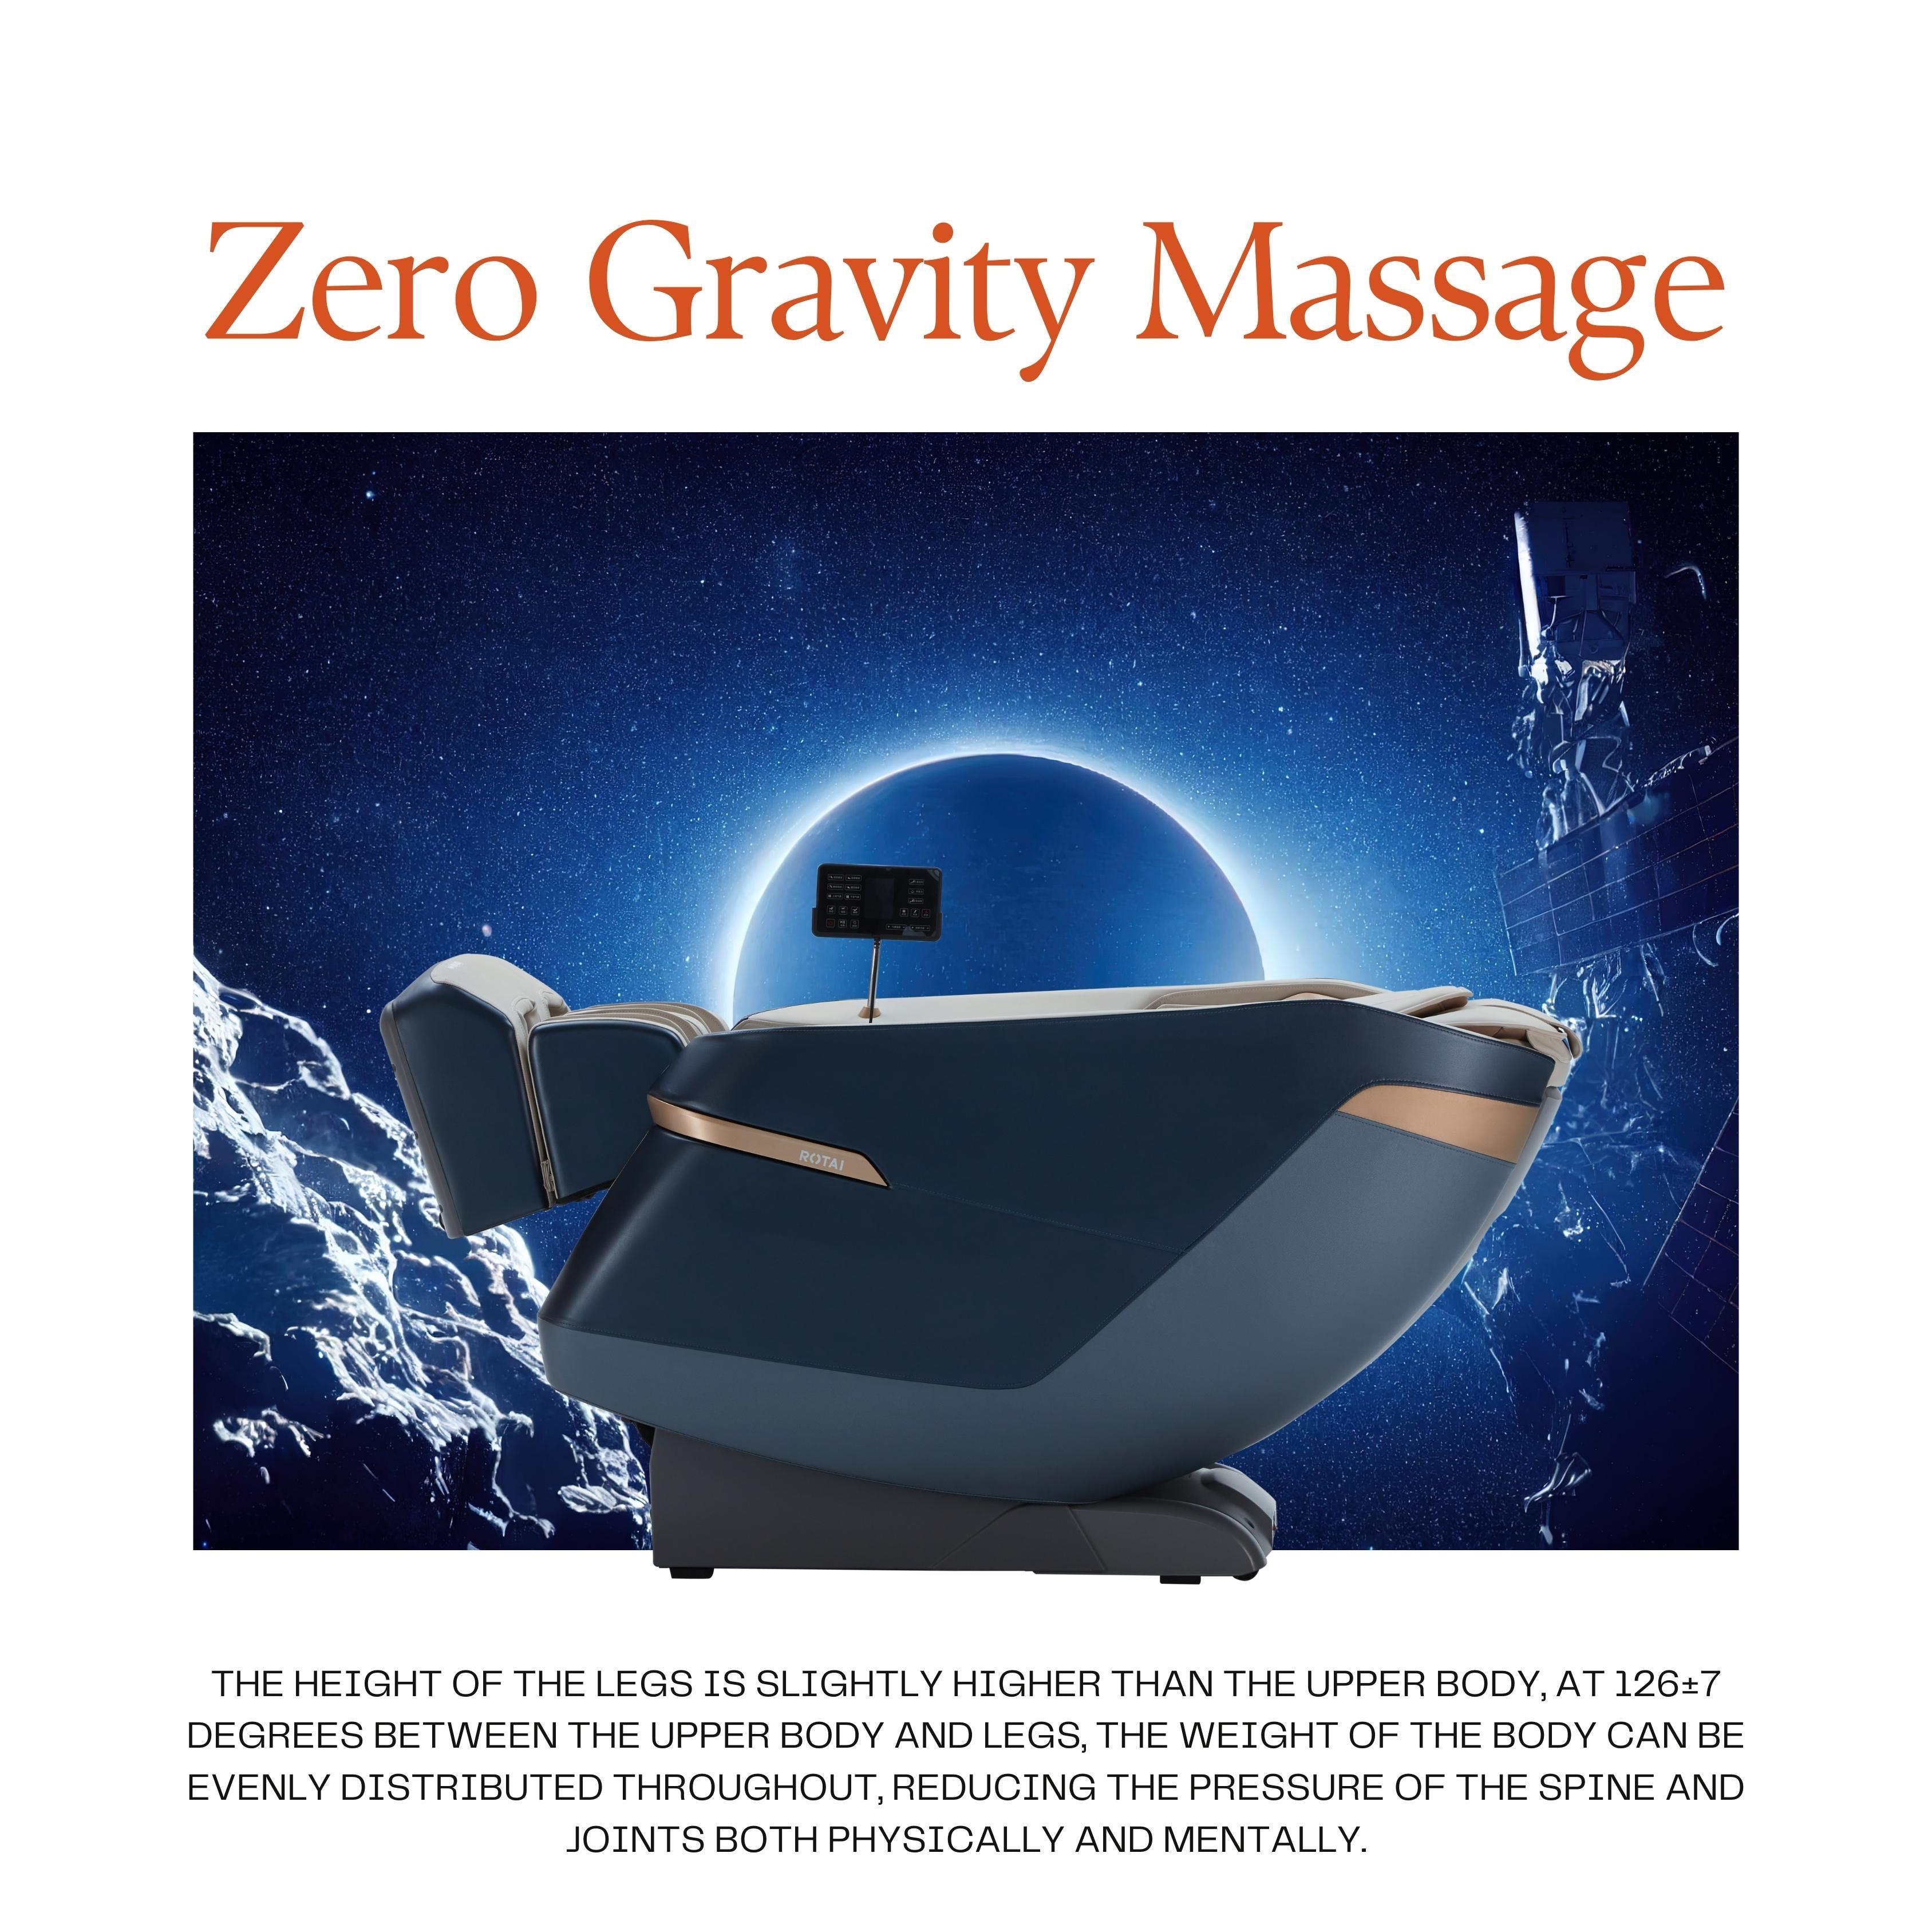 Zero Gravity Massage Chair in space-themed background promoting reduced spine pressure and ultimate relaxation. Best massage chair UAE.